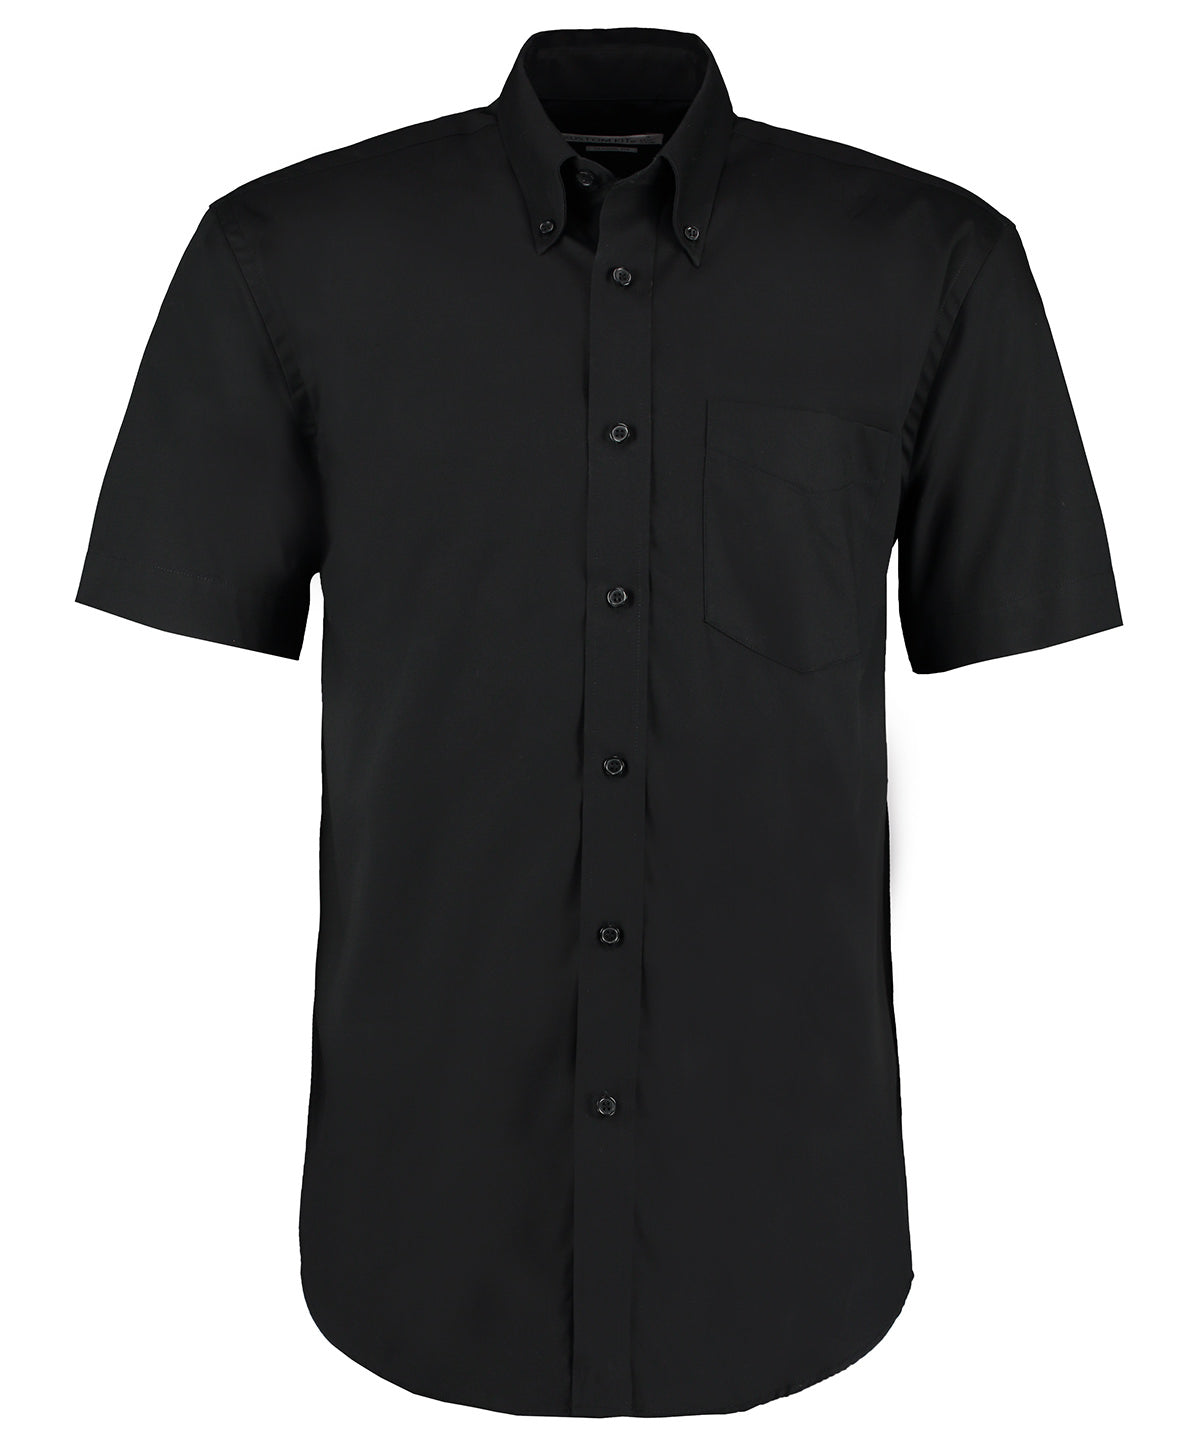 Bolir - Corporate Oxford Shirt Short-sleeved (classic Fit)